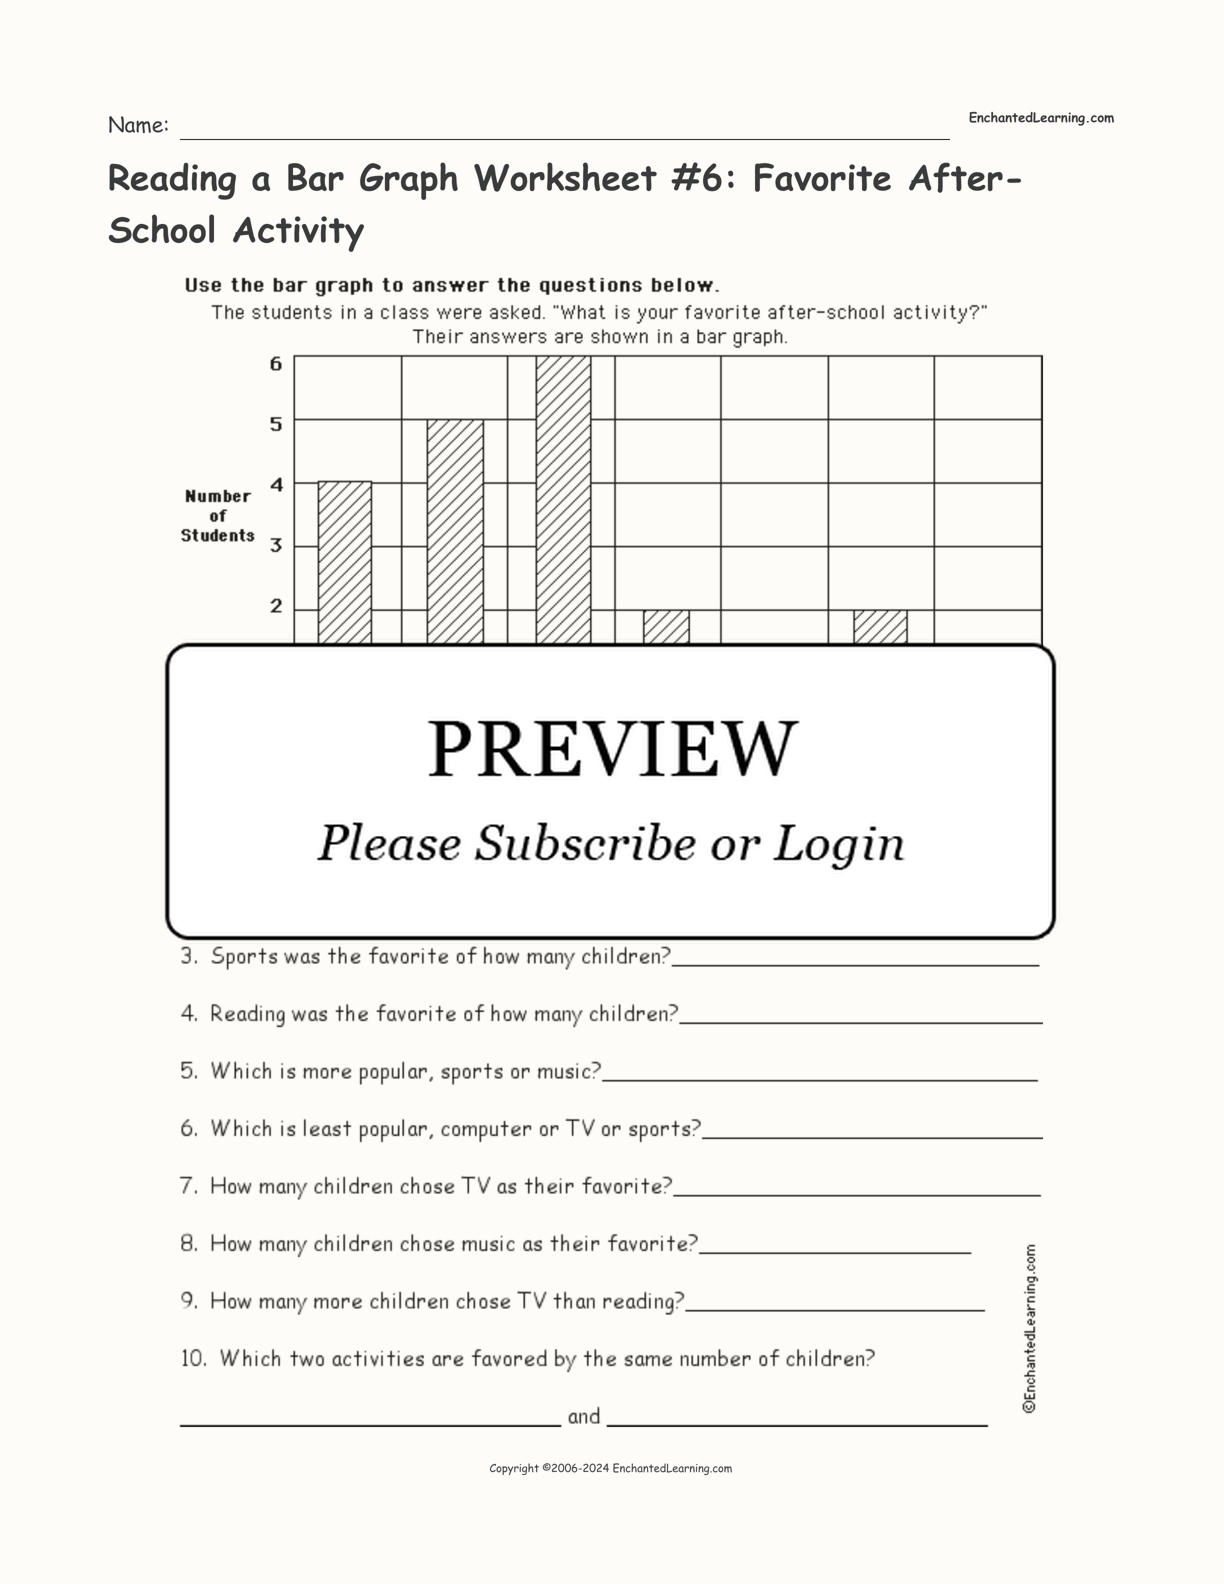 Reading a Bar Graph Worksheet #6: Favorite After-School Activity interactive worksheet page 1